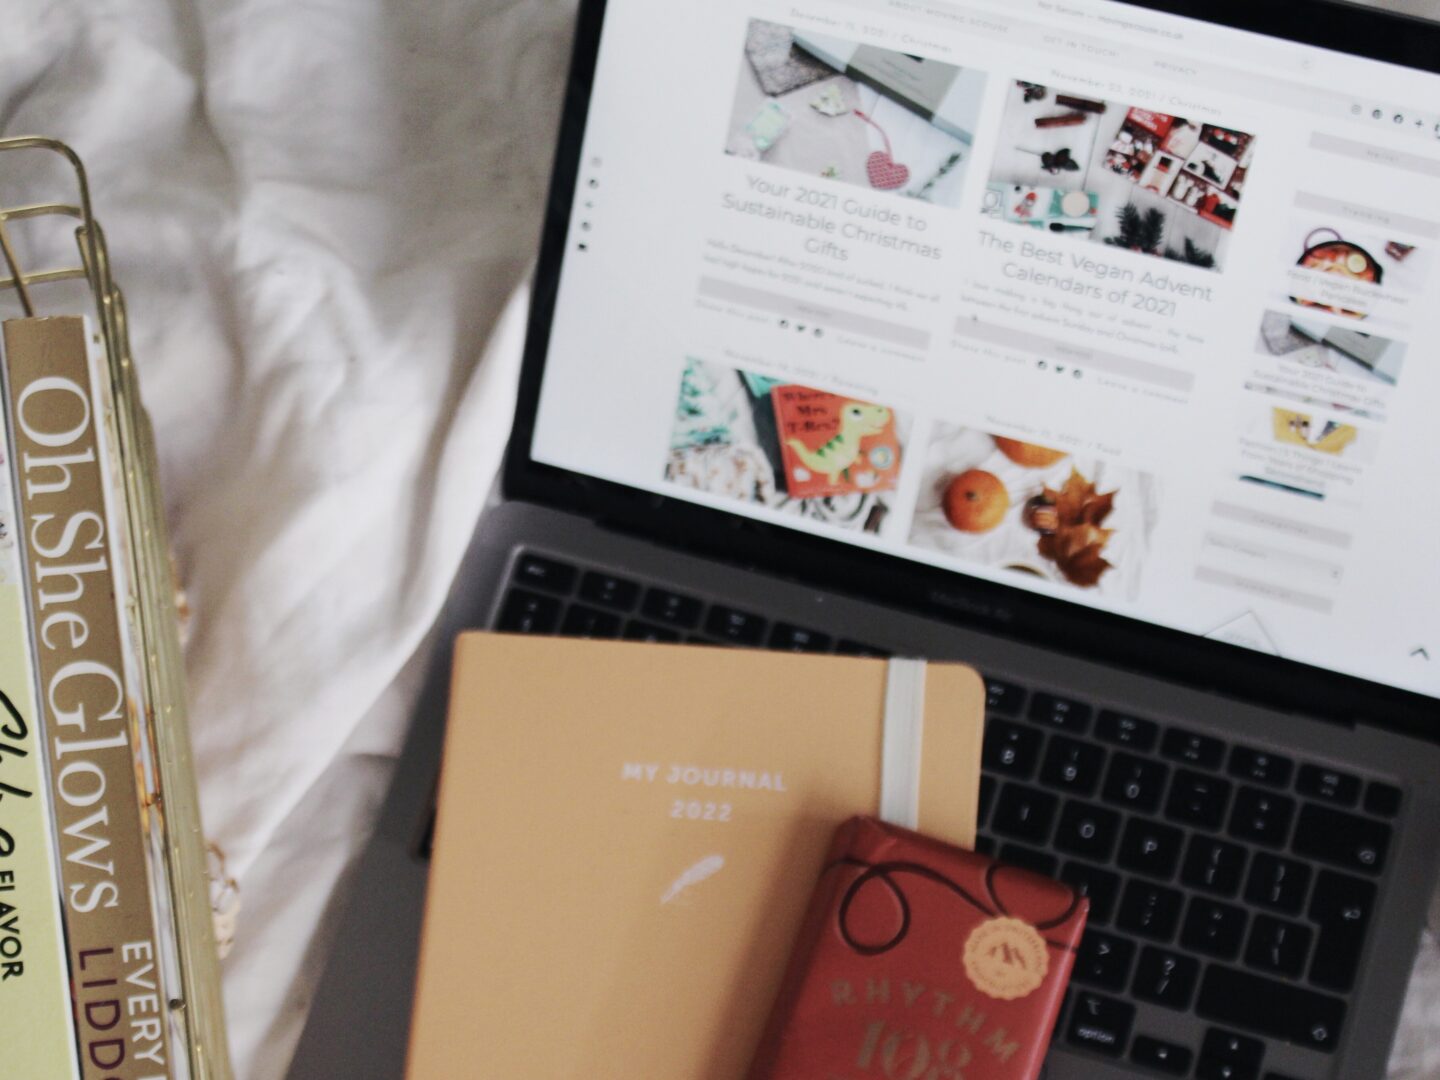 Decorative flatly with cookbooks, laptop, diary and chocolate, for a post about Veganuary.